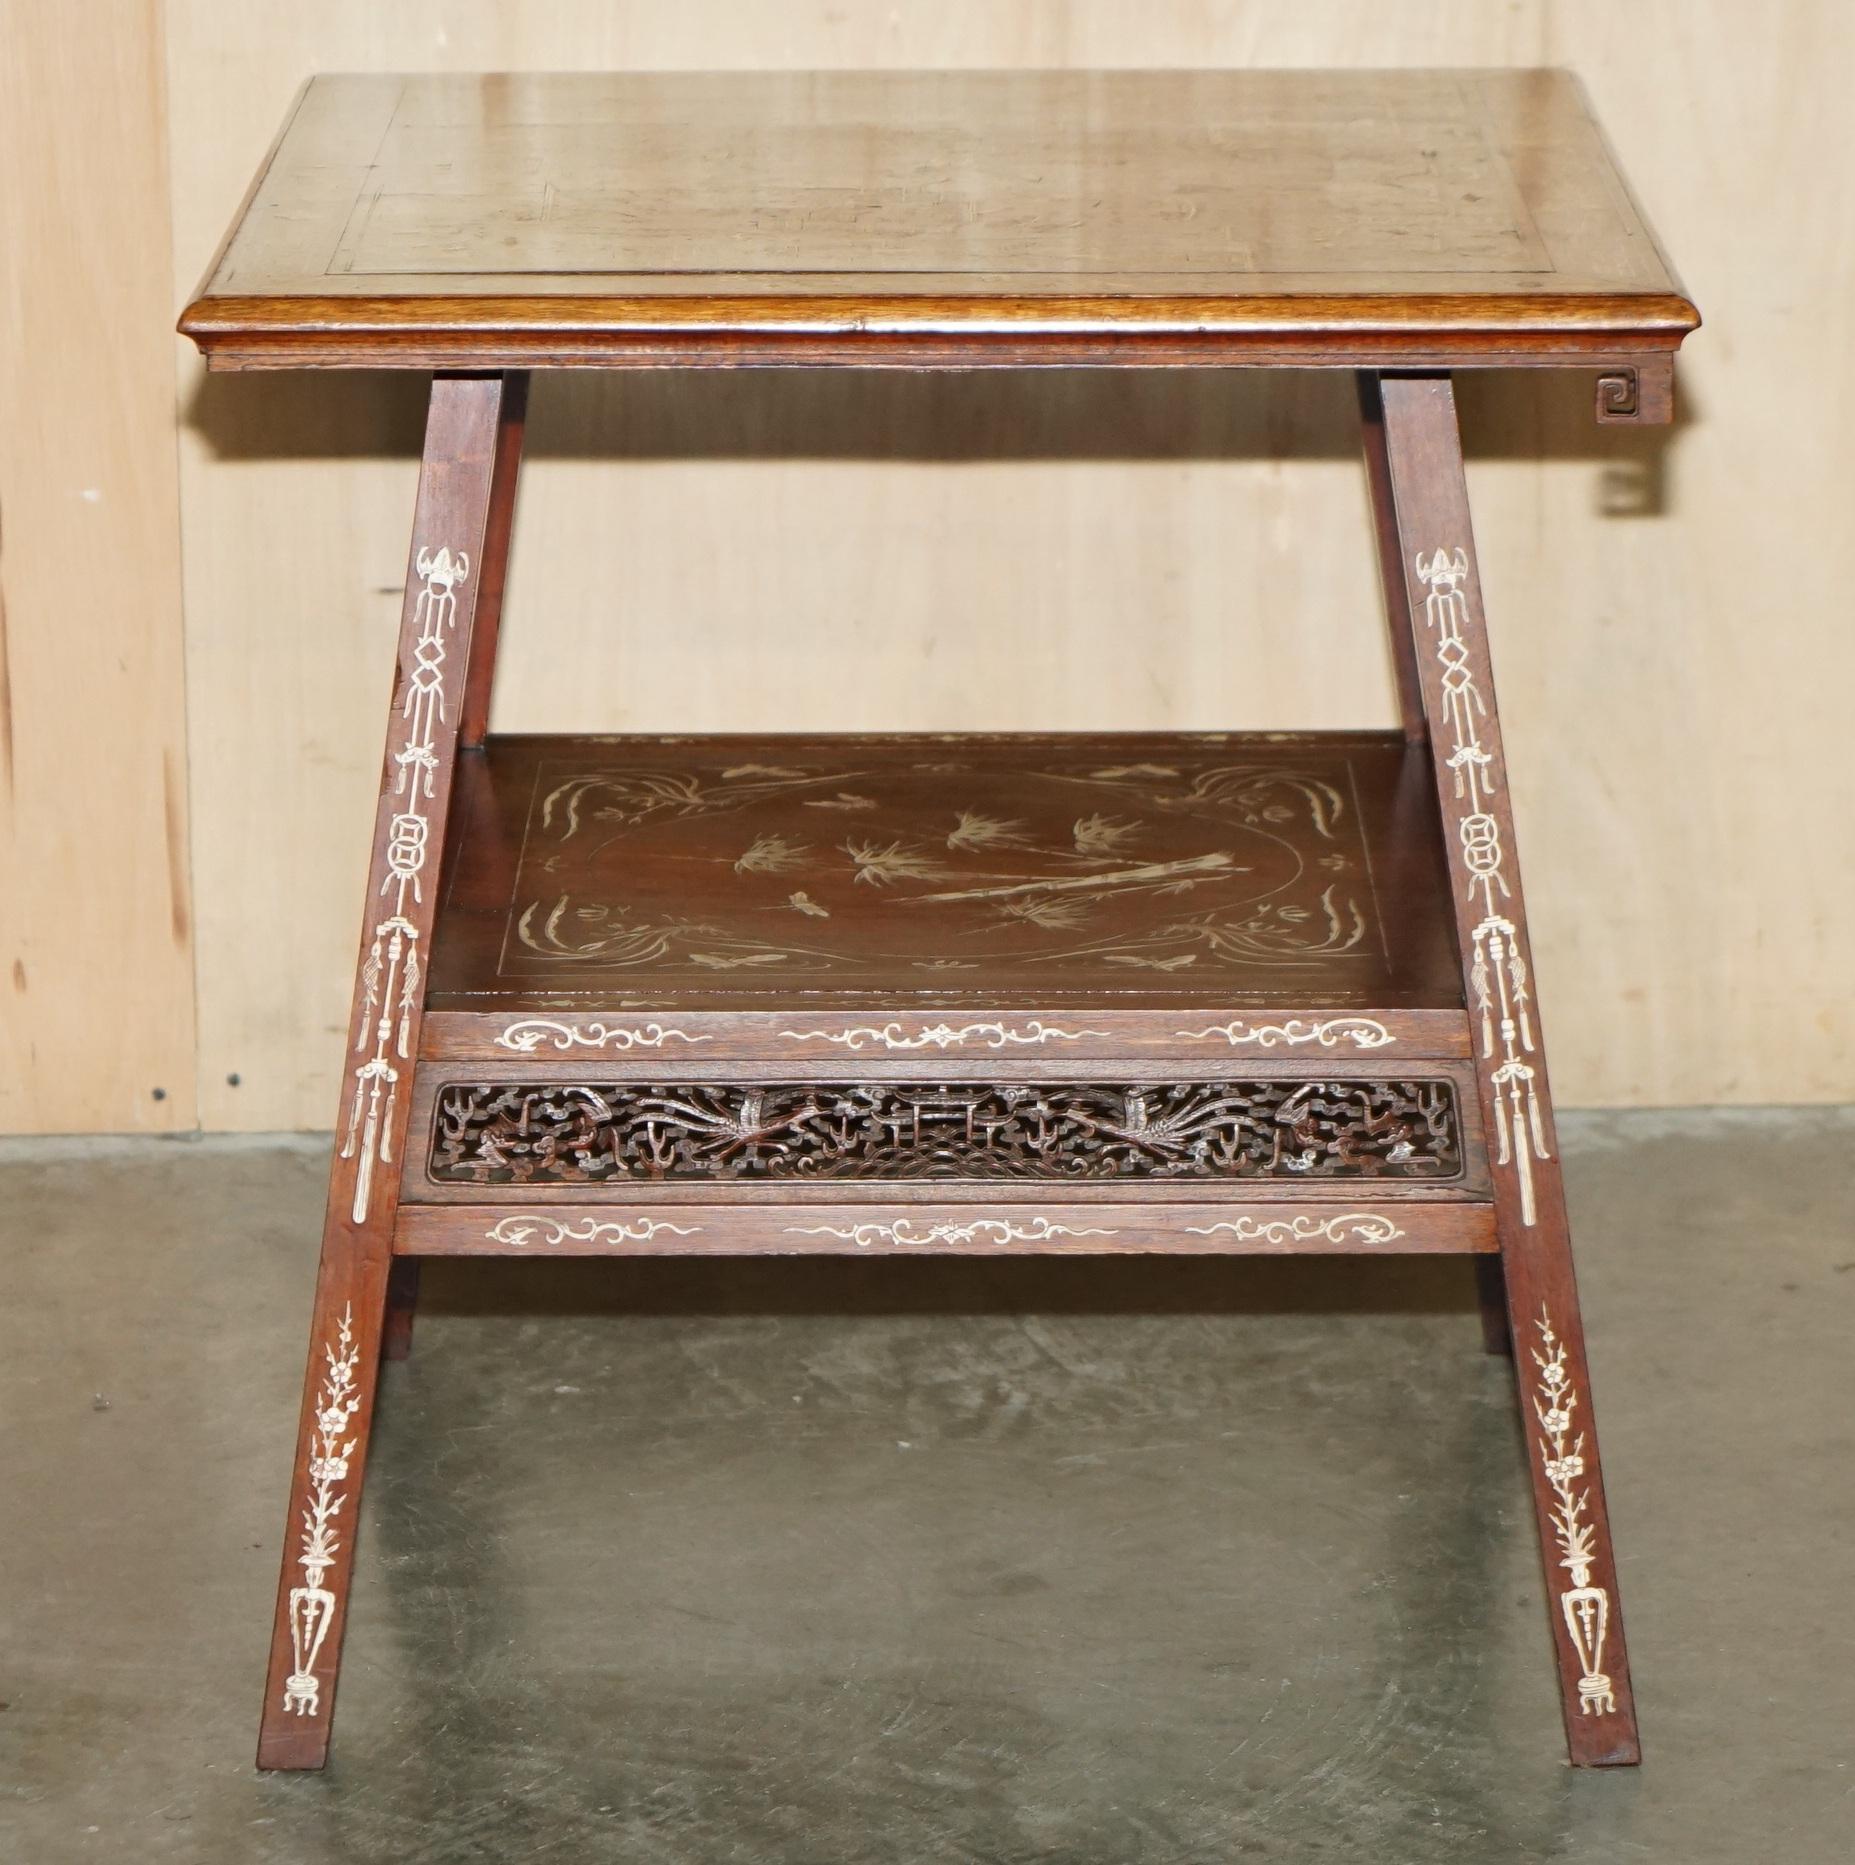 ANTIQUE CIRCA 1900ORNATELY CARVED AND HEAViLY INLAID CHINESE OCCASIONAL TABLE im Angebot 7